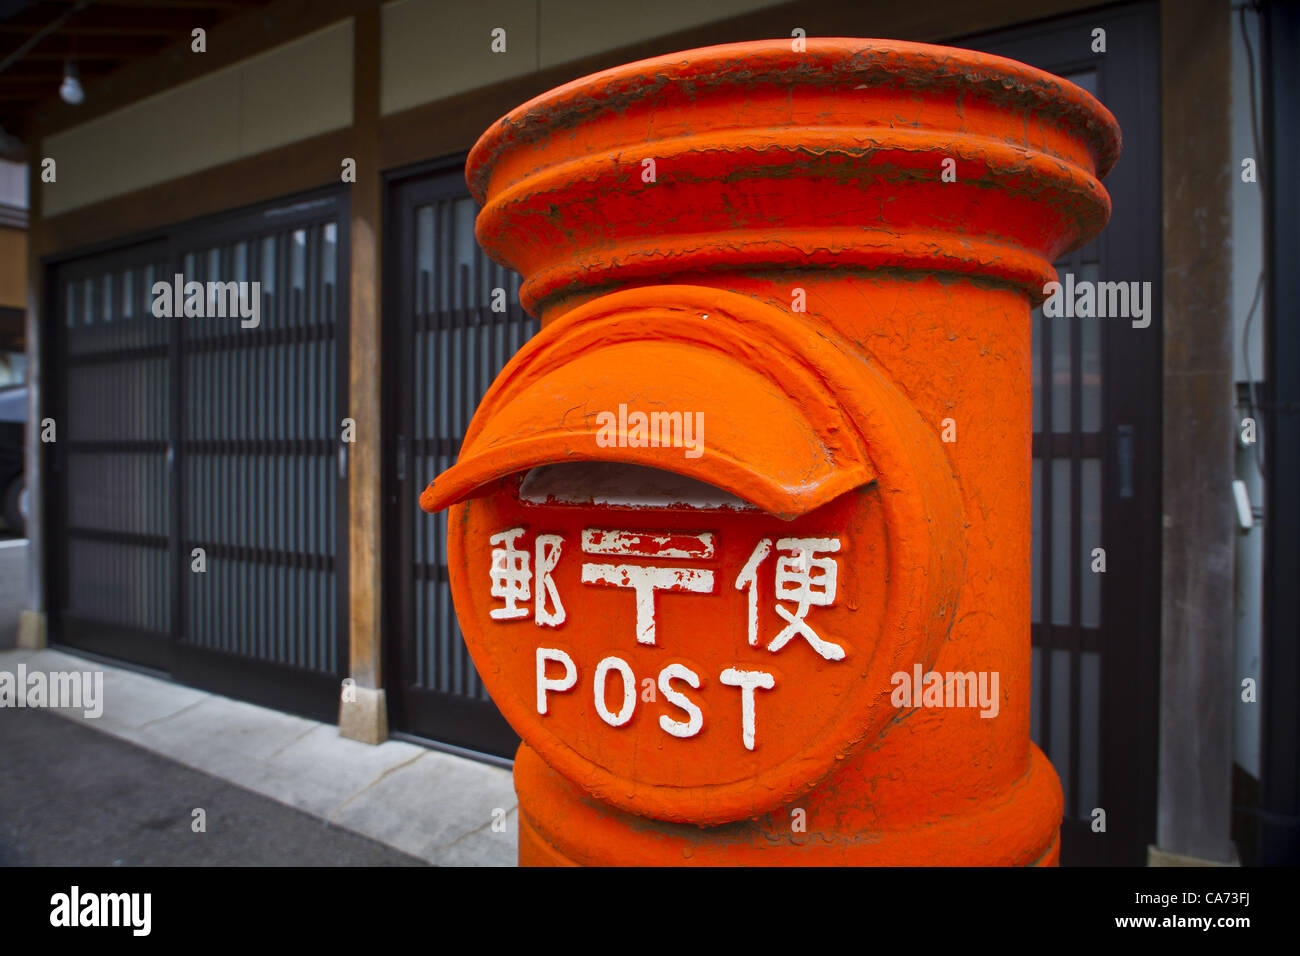 June 15, 2012 - Yamanaka Onsen, Japan - June 15, 2012 - Yamanaka Onsen, Japan - Yamanaka Onsen is a small city in Kaga Prefecture, in western Japan, famous for its onsen, or natural hot spring baths. An old-fashioned mail box. (Credit Image: © David Poller/ZUMAPRESS.com) Stock Photo